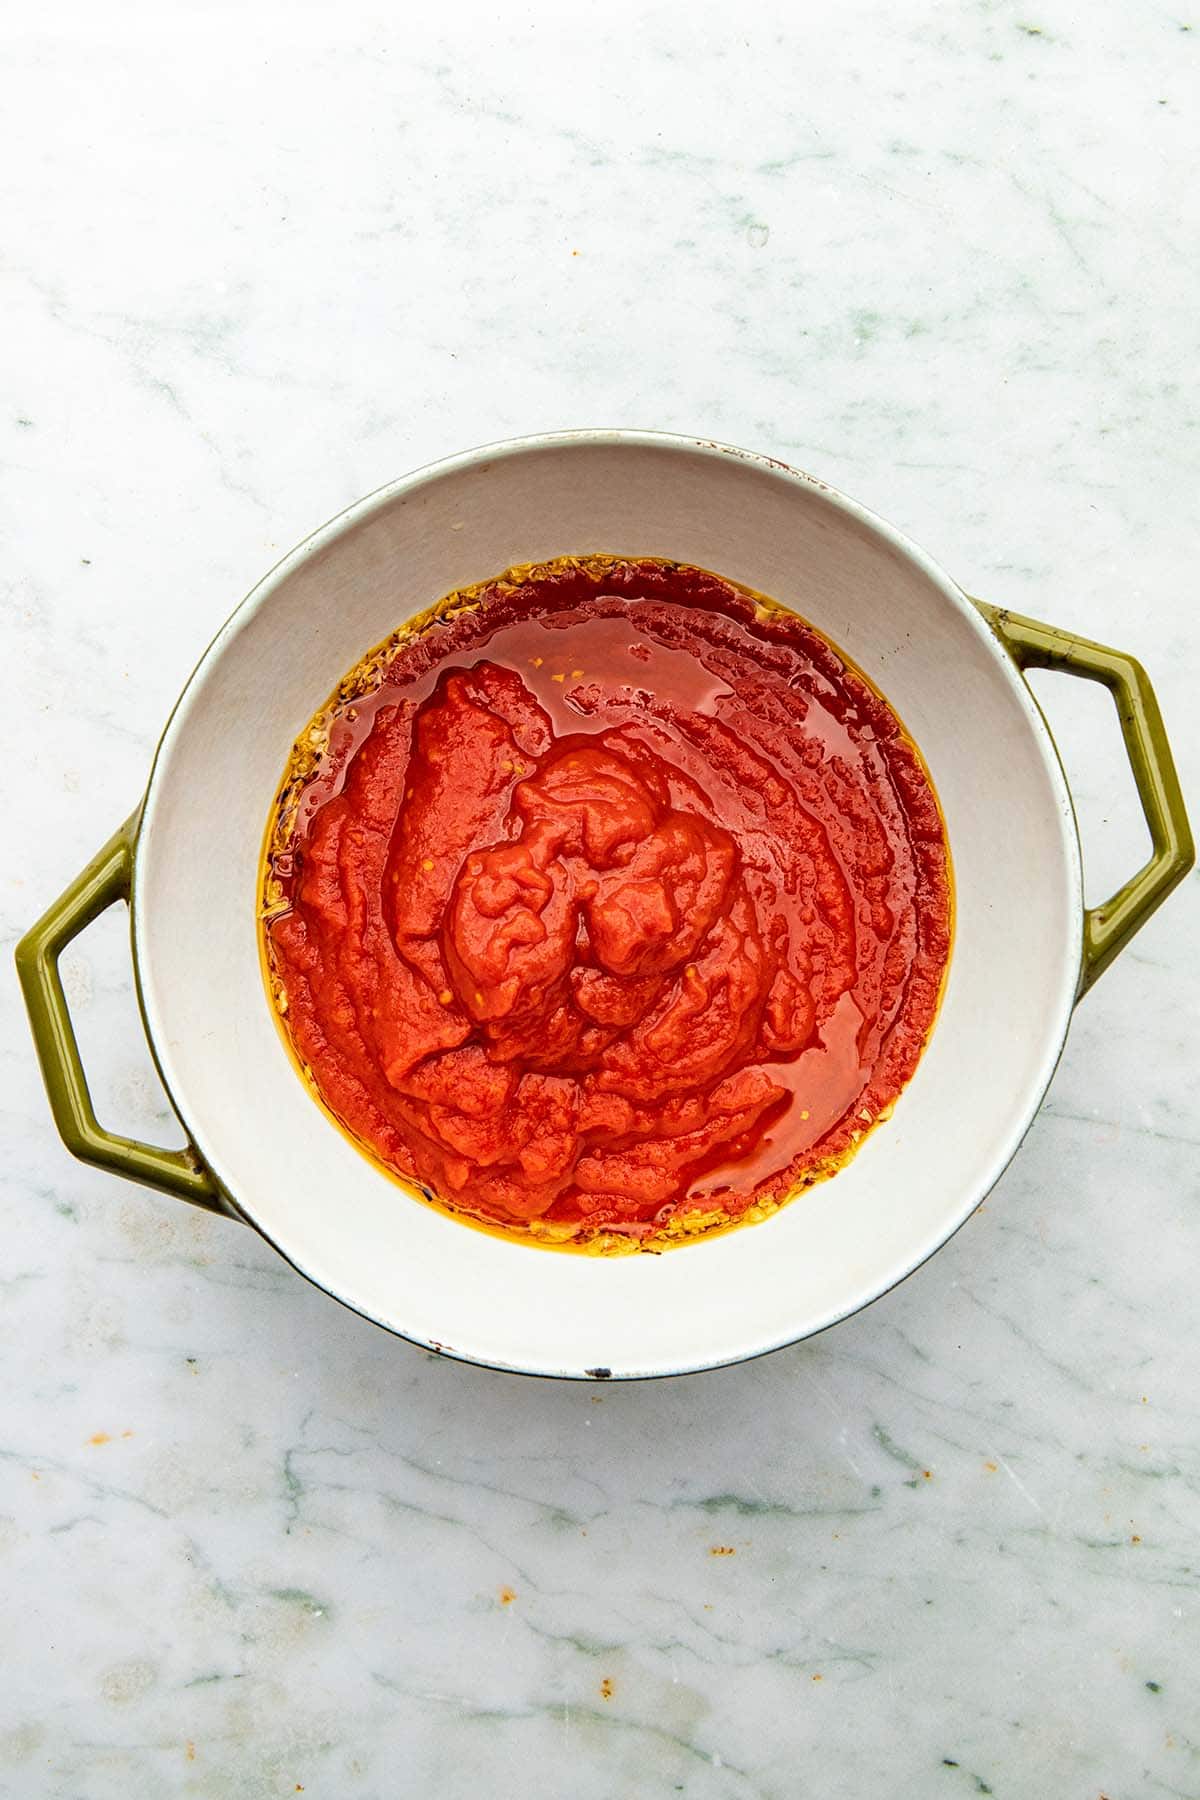 A pot of uncooked homemade tomato sauce.